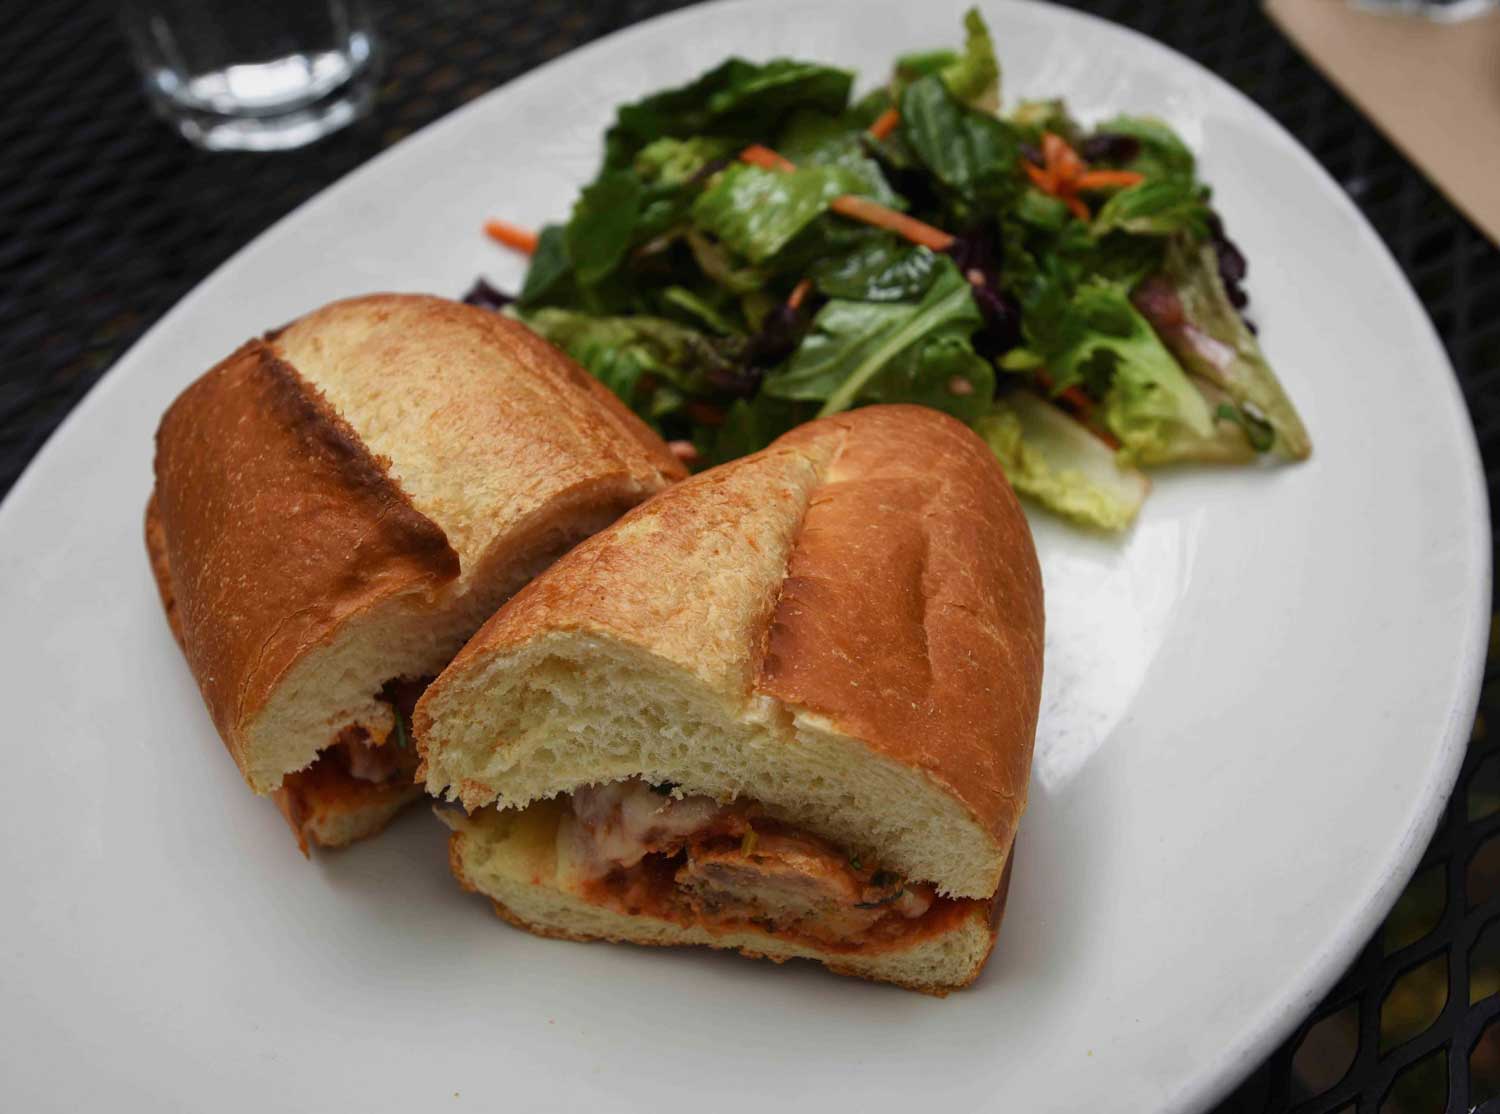 The Arlequin meatball sandwich is perfect for enjoying on the cafe's garden patio